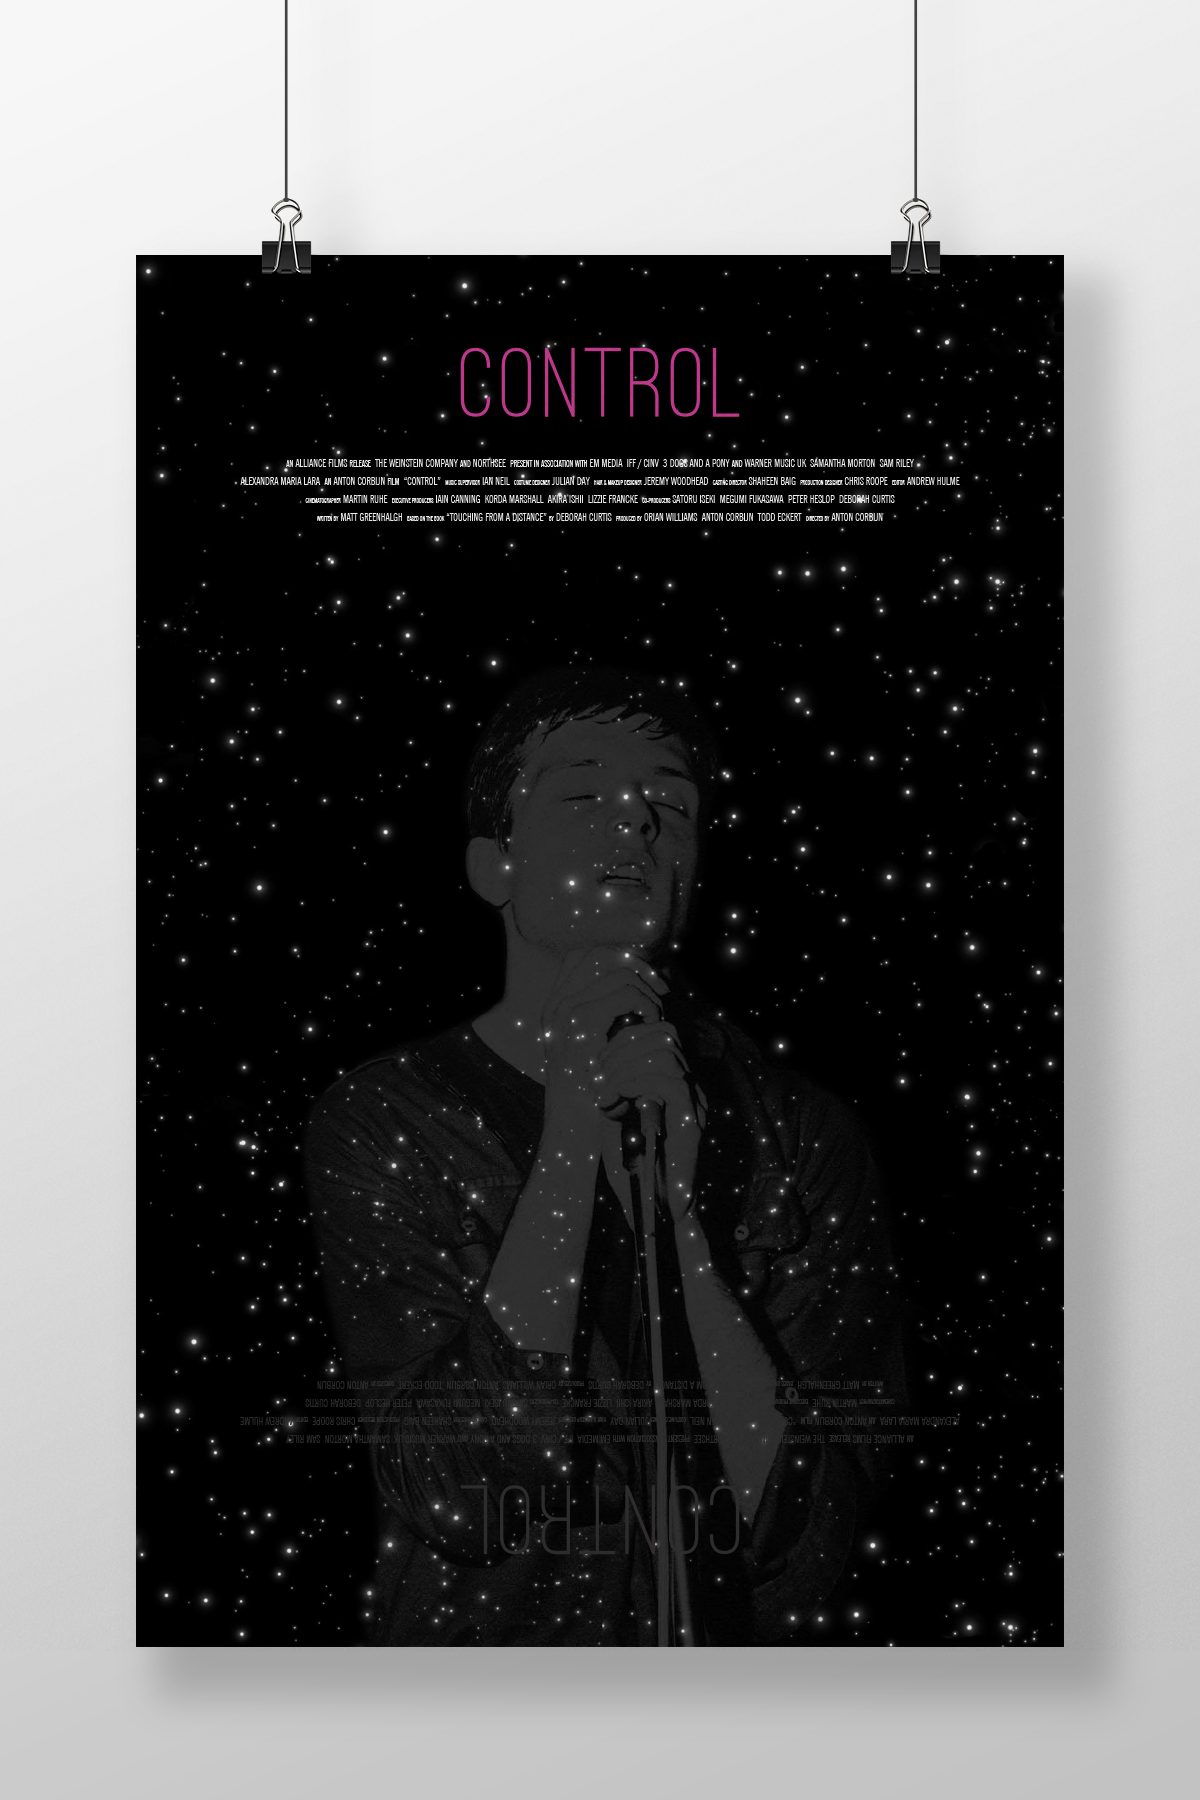 control poster film poster movie poster Ian Curtis joy division she's lost control Post punk post-punk Controle unknown pleasures Closer substance Space  movie